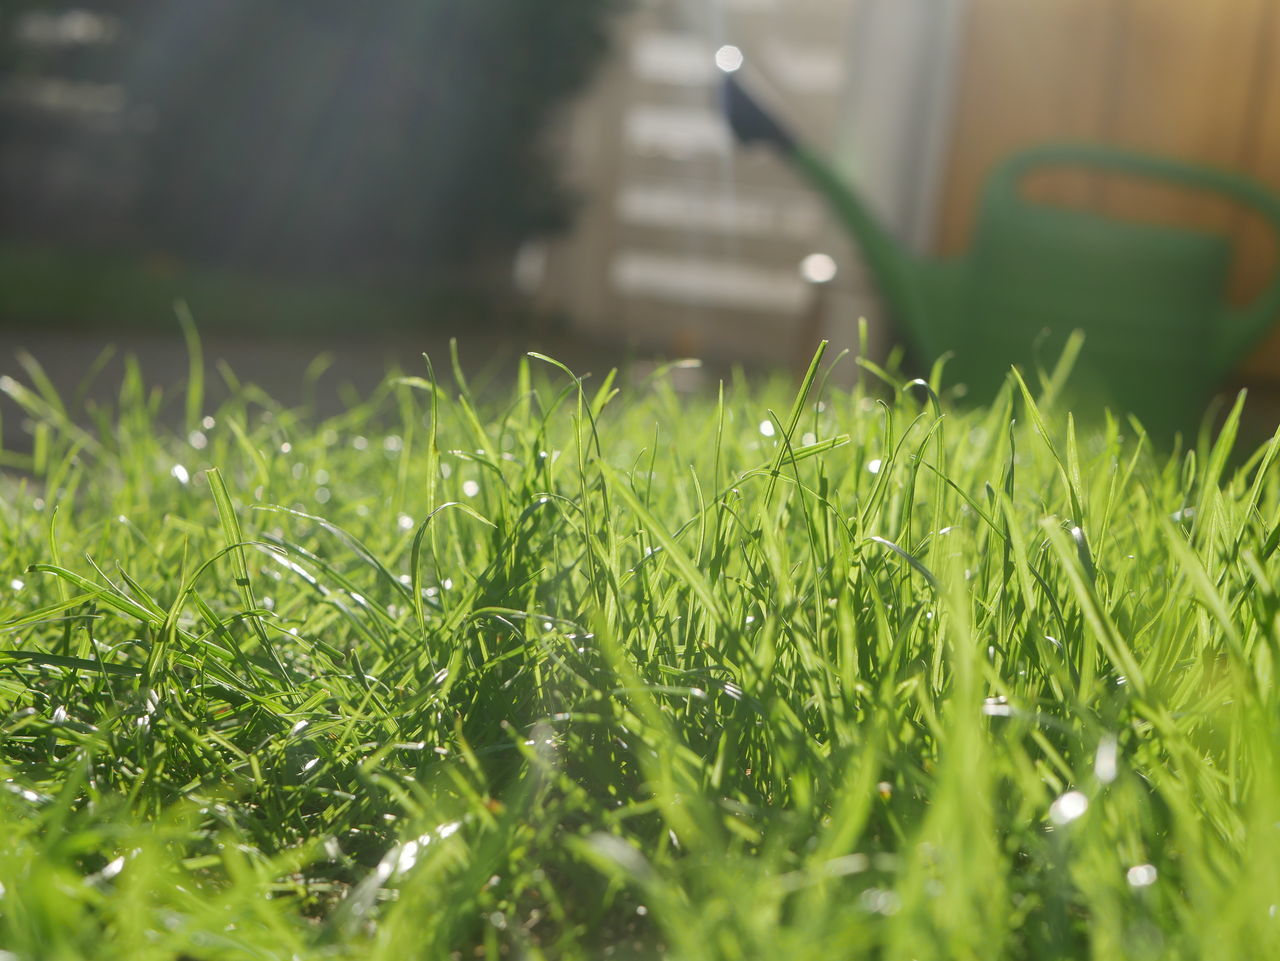 CLOSE-UP OF WET GRASS GROWING IN LAWN